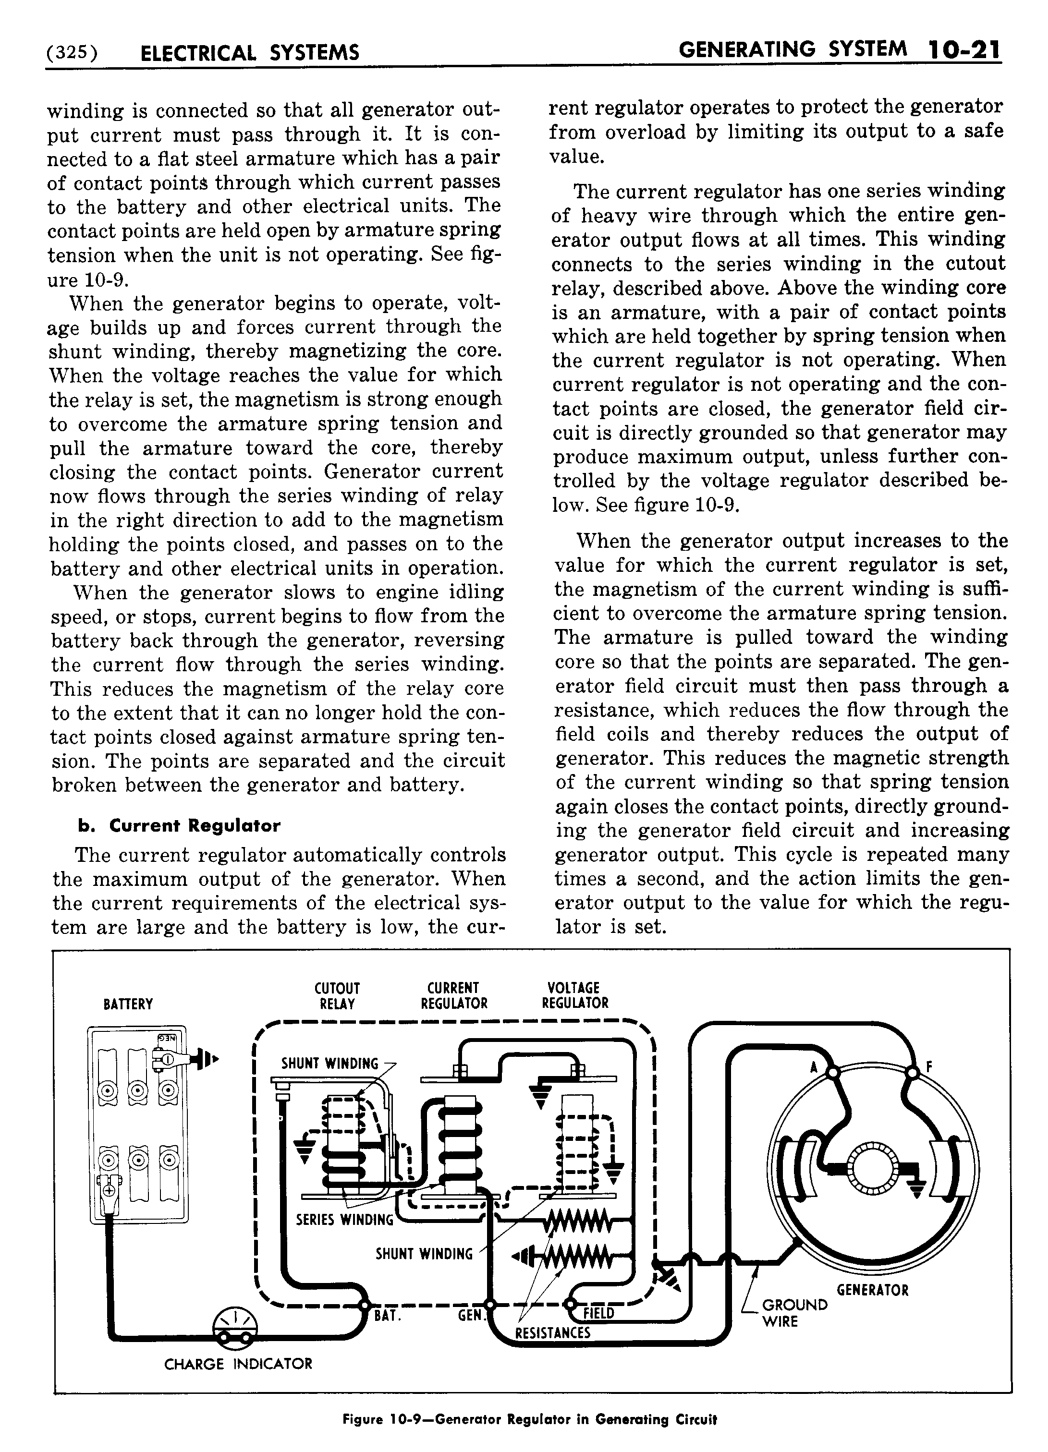 n_11 1955 Buick Shop Manual - Electrical Systems-021-021.jpg